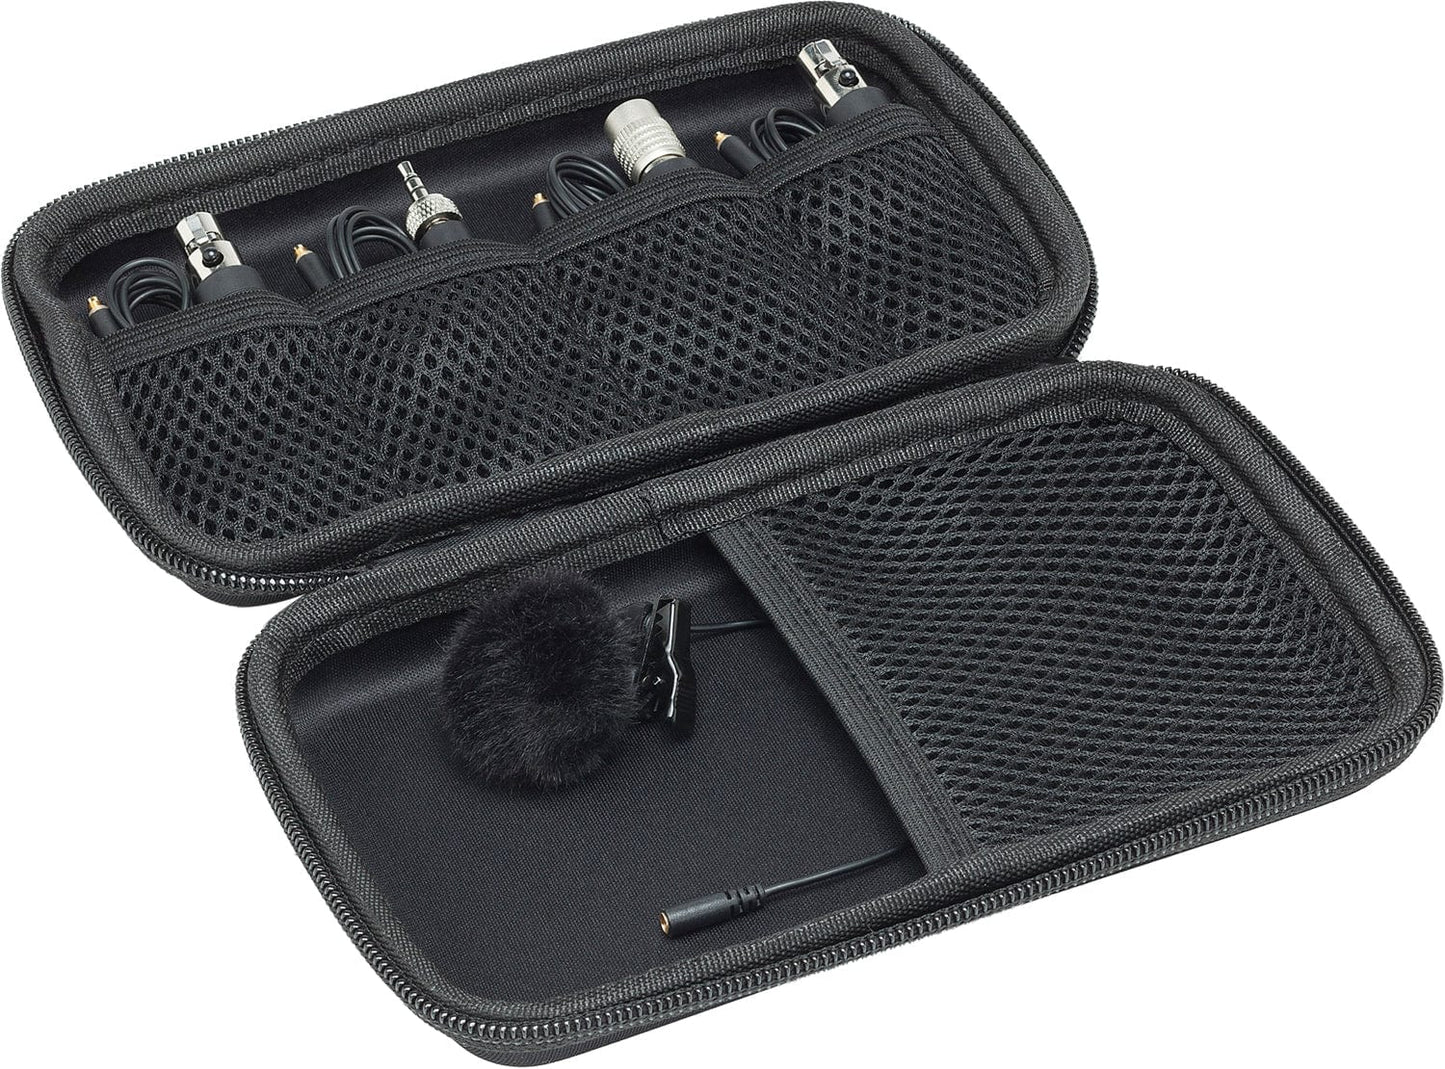 Samson SALM7B Unidirectional Lavalier Microphone w/ Hirose 4-Pin Switchcraft TA3F and TA4F Cables - PSSL ProSound and Stage Lighting